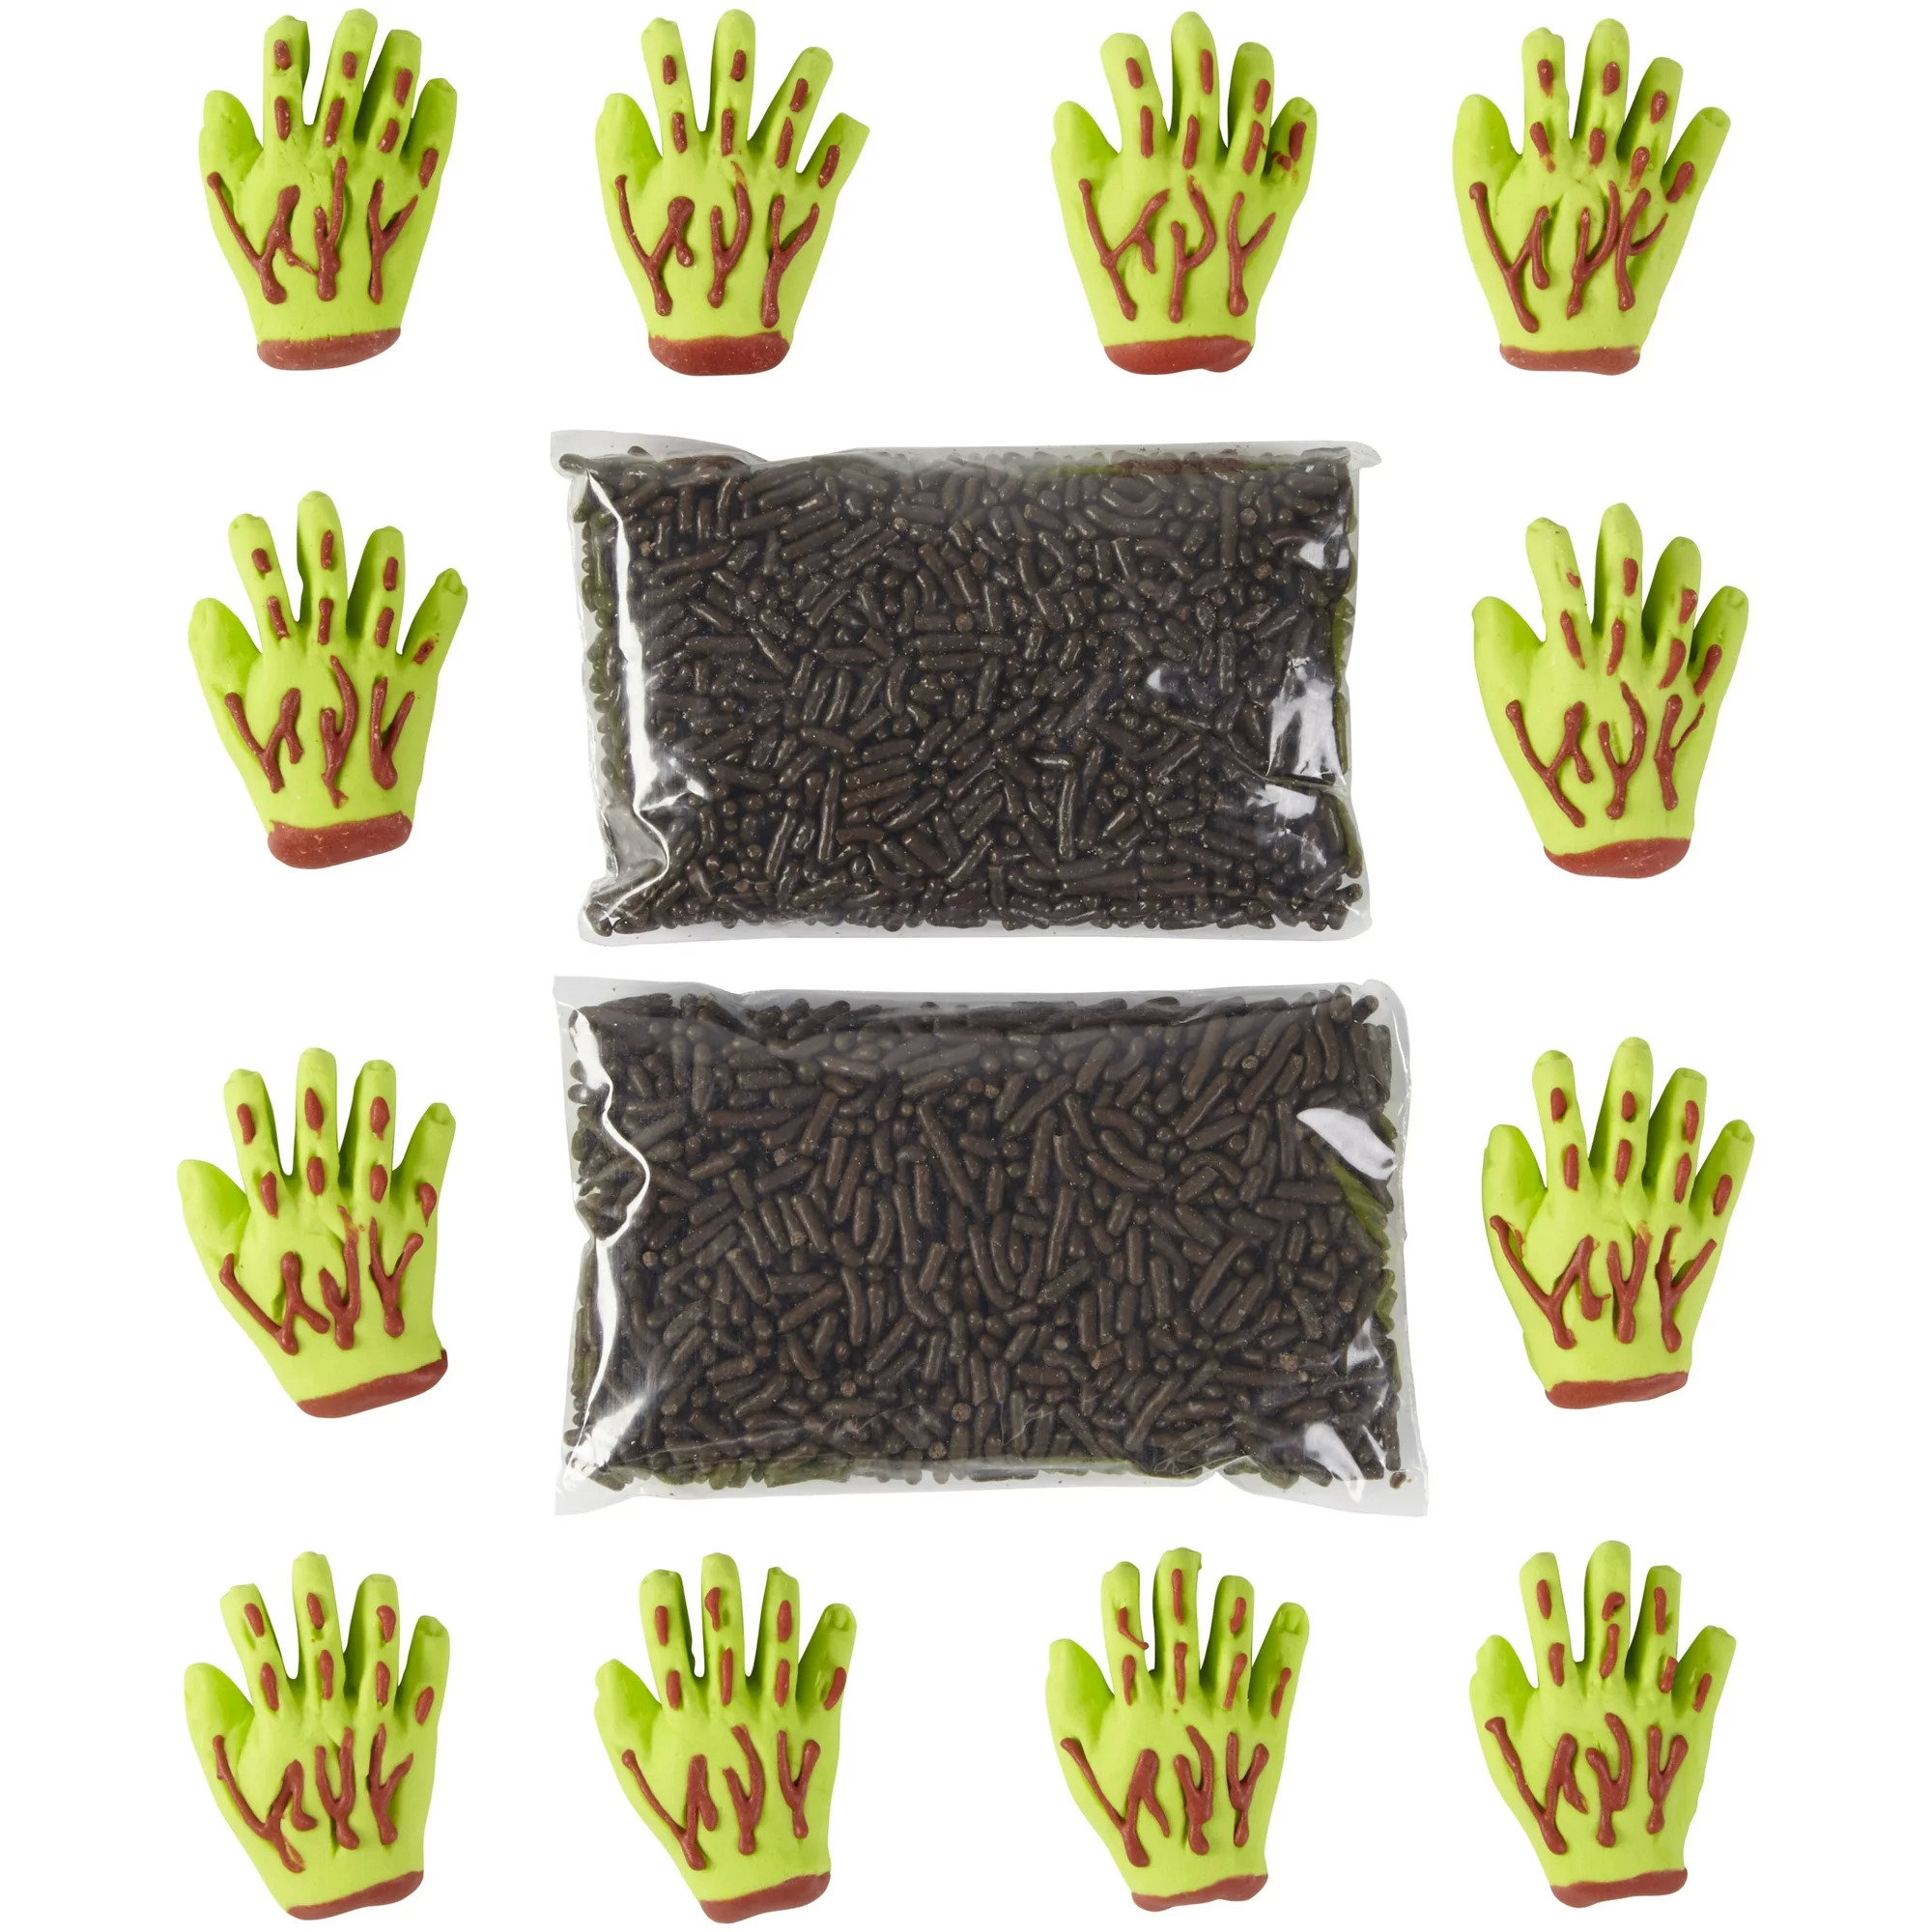 Wilton Zombie Hand Cake Decorating Kit w/ 12-Zombie Hands & Chocolate Sprinkles $6.44 + Free Shipping w/ Walmart+ or Free Store Pick Up at Walmart